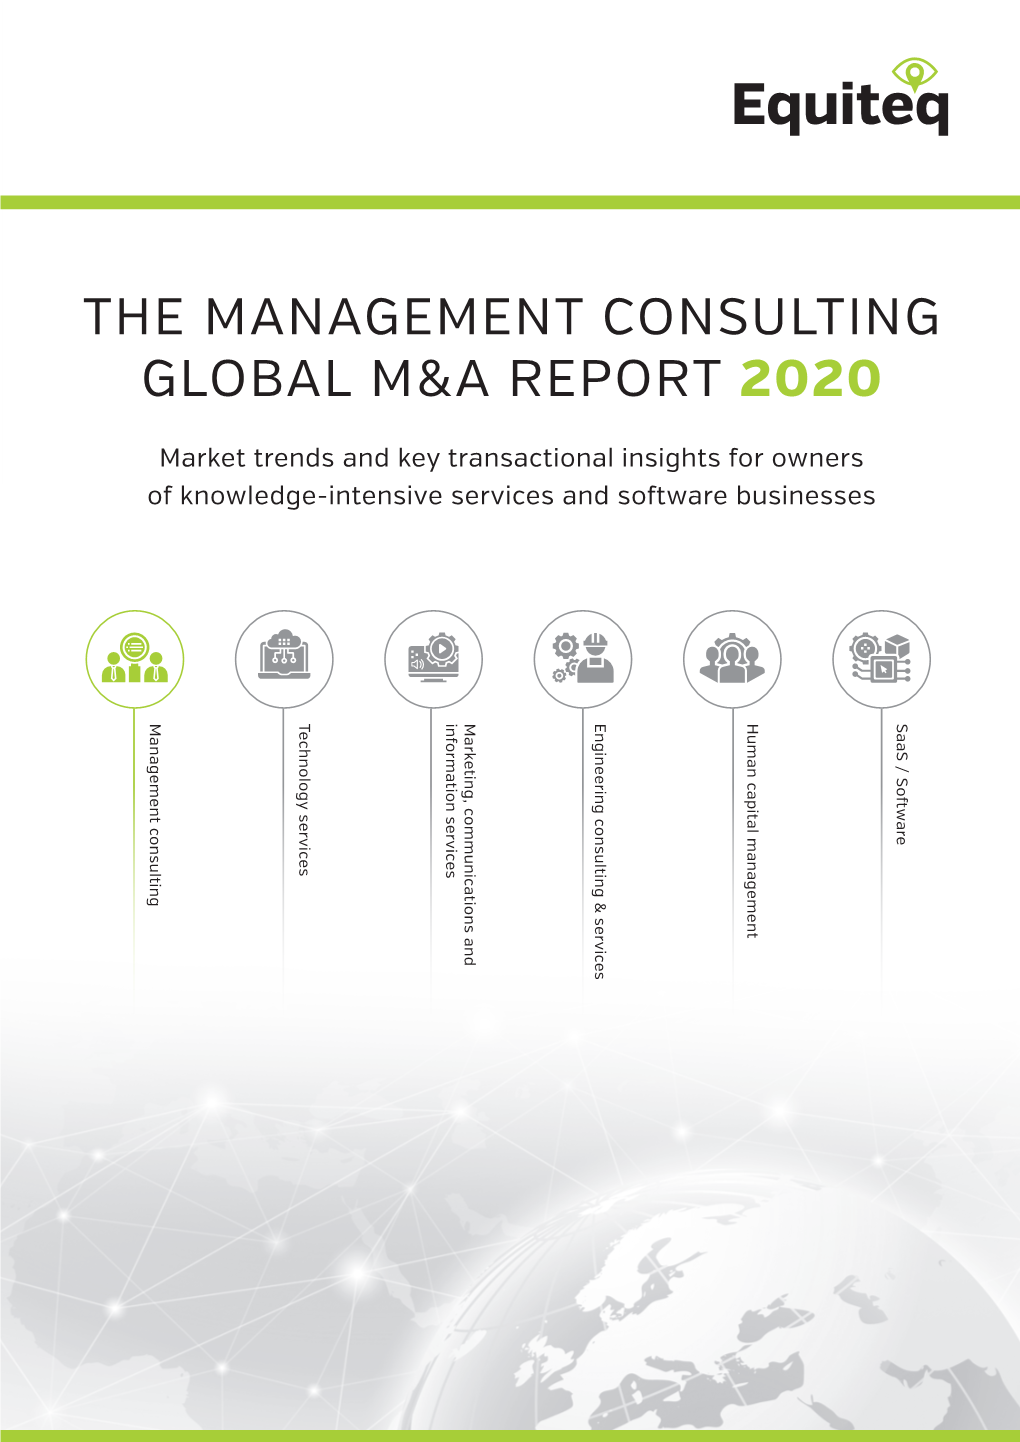 Management Consulting GLOBAL M&A REPORT M&A GLOBAL the MANAGEMENT CONSULTING CONSULTING the MANAGEMENT FOREWORD